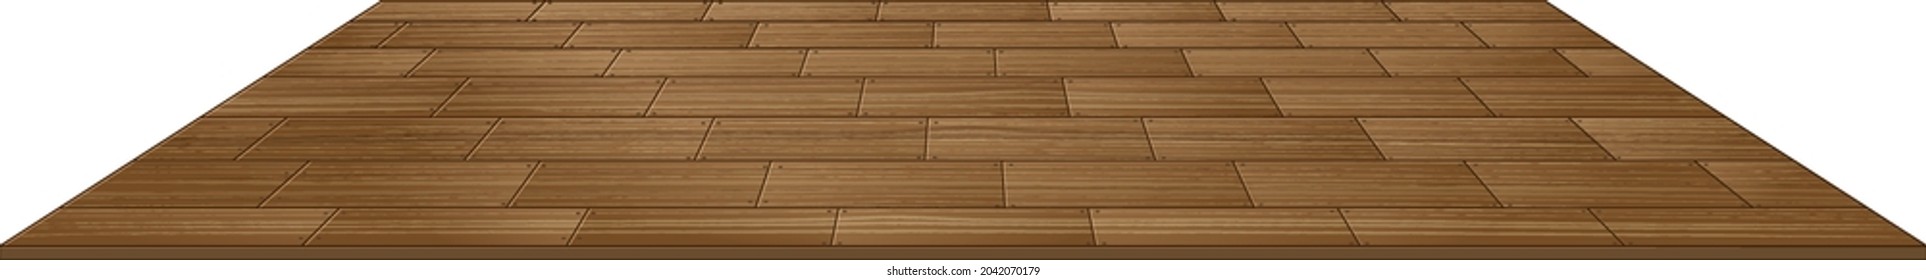 Floor tiles with wooden pattern on white background illustration - Shutterstock ID 2042070179